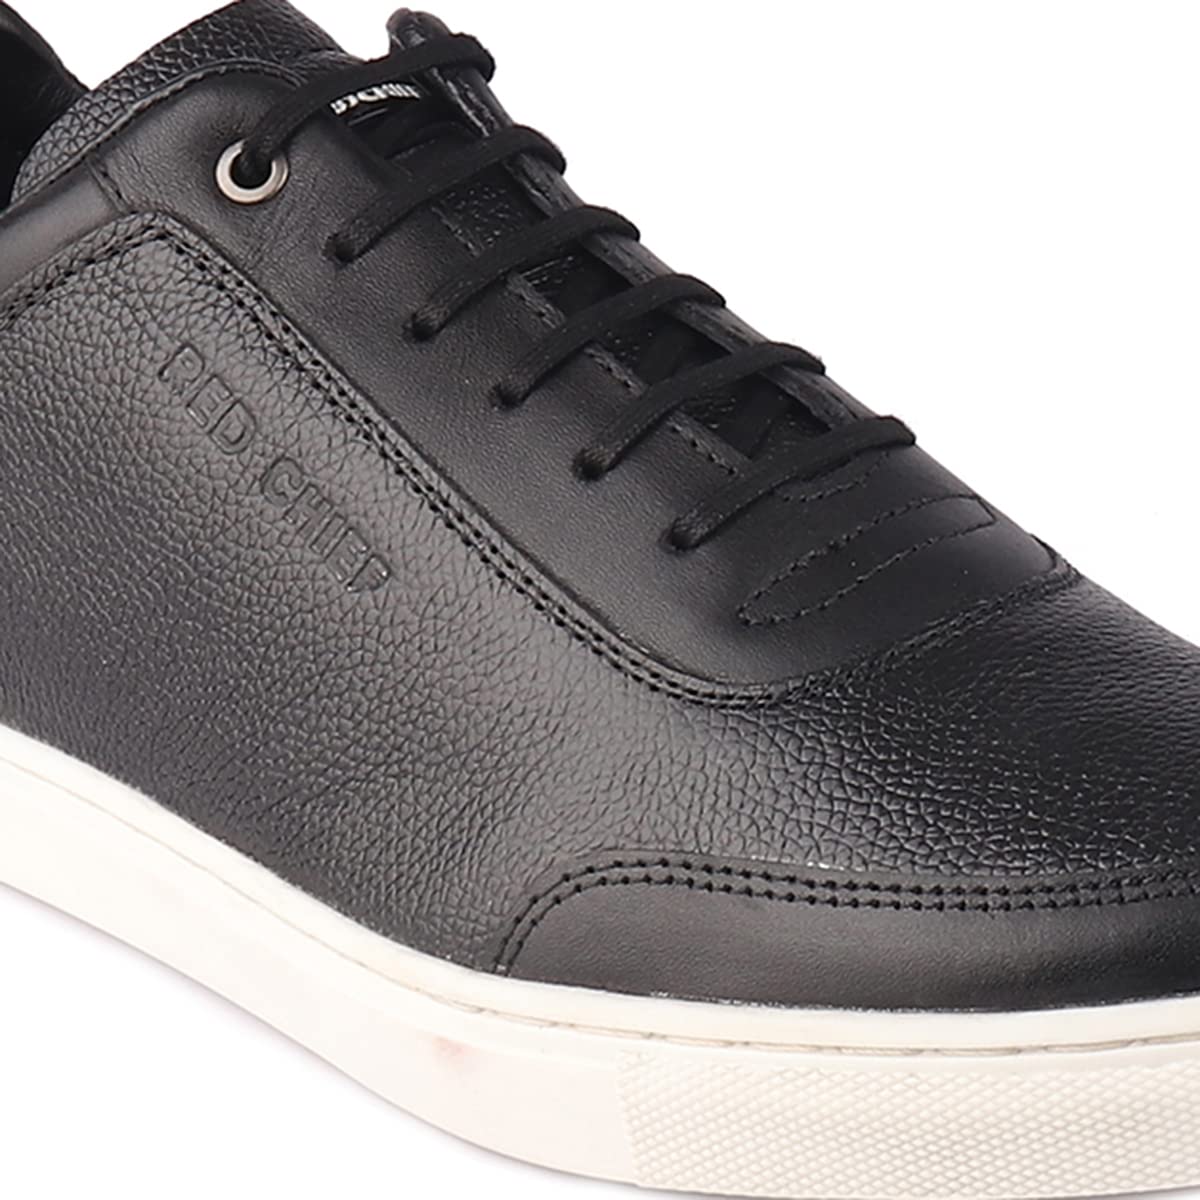 Red Chief Black Leather Sneakers for Men